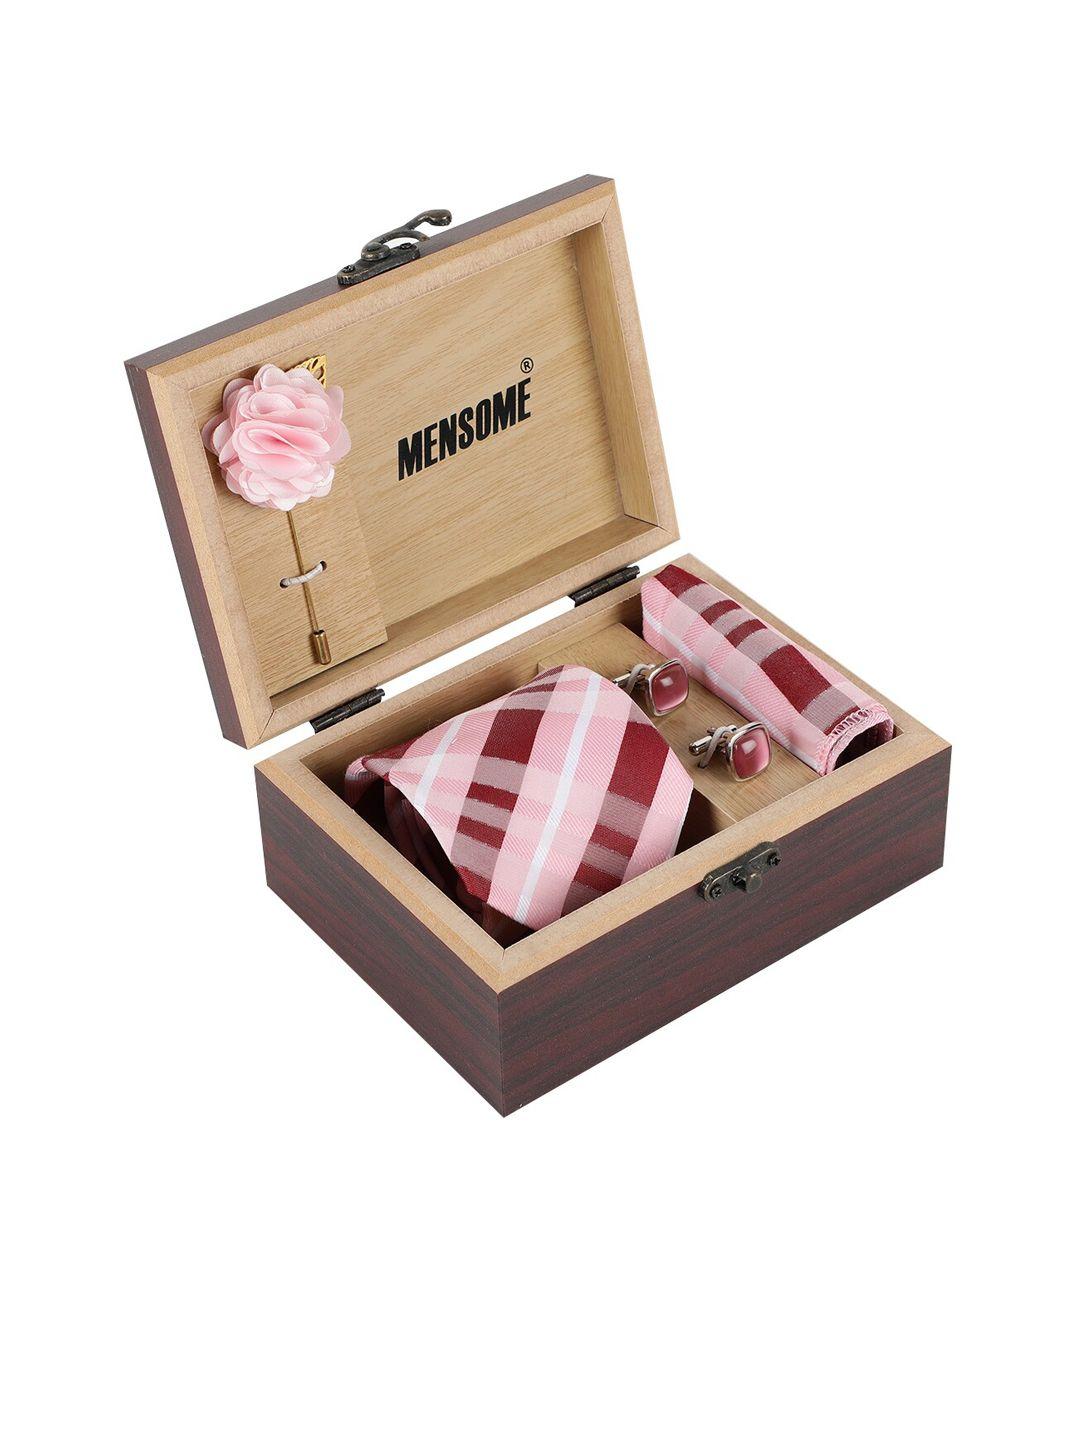 mensome men pink & maroon accessory gift set